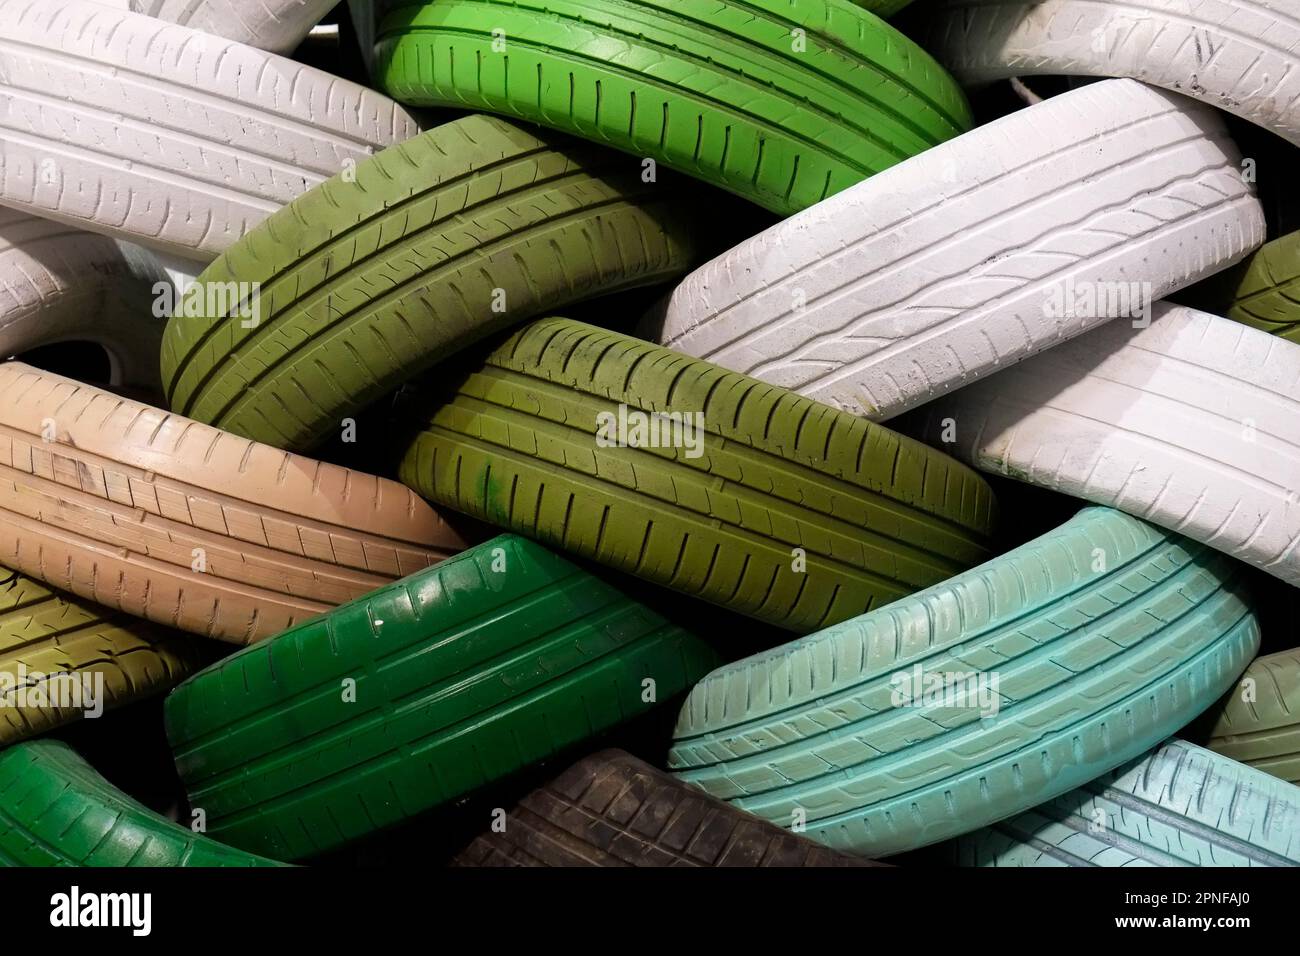 Wall of colorful recycled tires Stock Photo